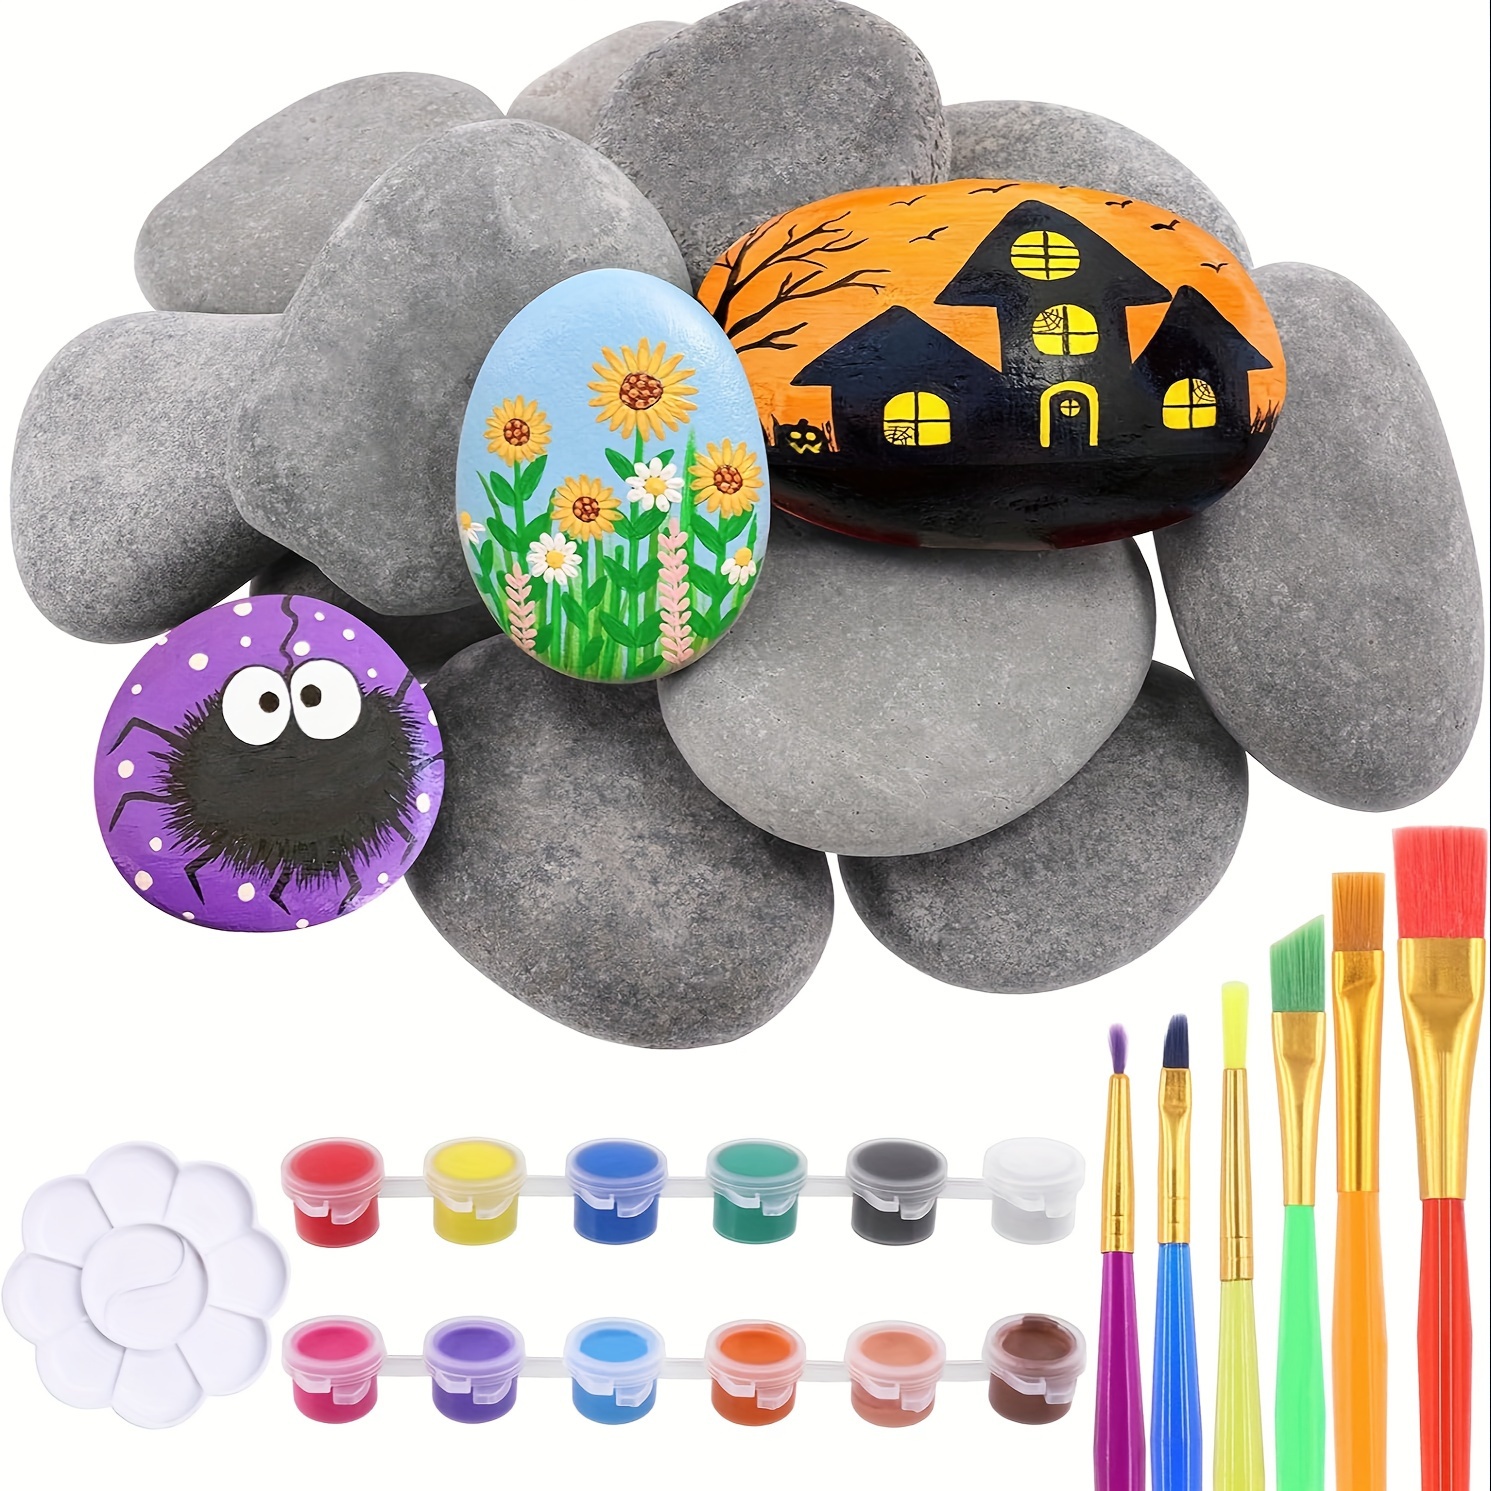 Rock Painting Kit For Kids, Stones Painting Diy Supplies Kit With Marker  Pens, Theme Creativity Arts And Crafts Gifts For Boys Girls Age 3 -12 Years  Old, Christmas Gifts For Kids 